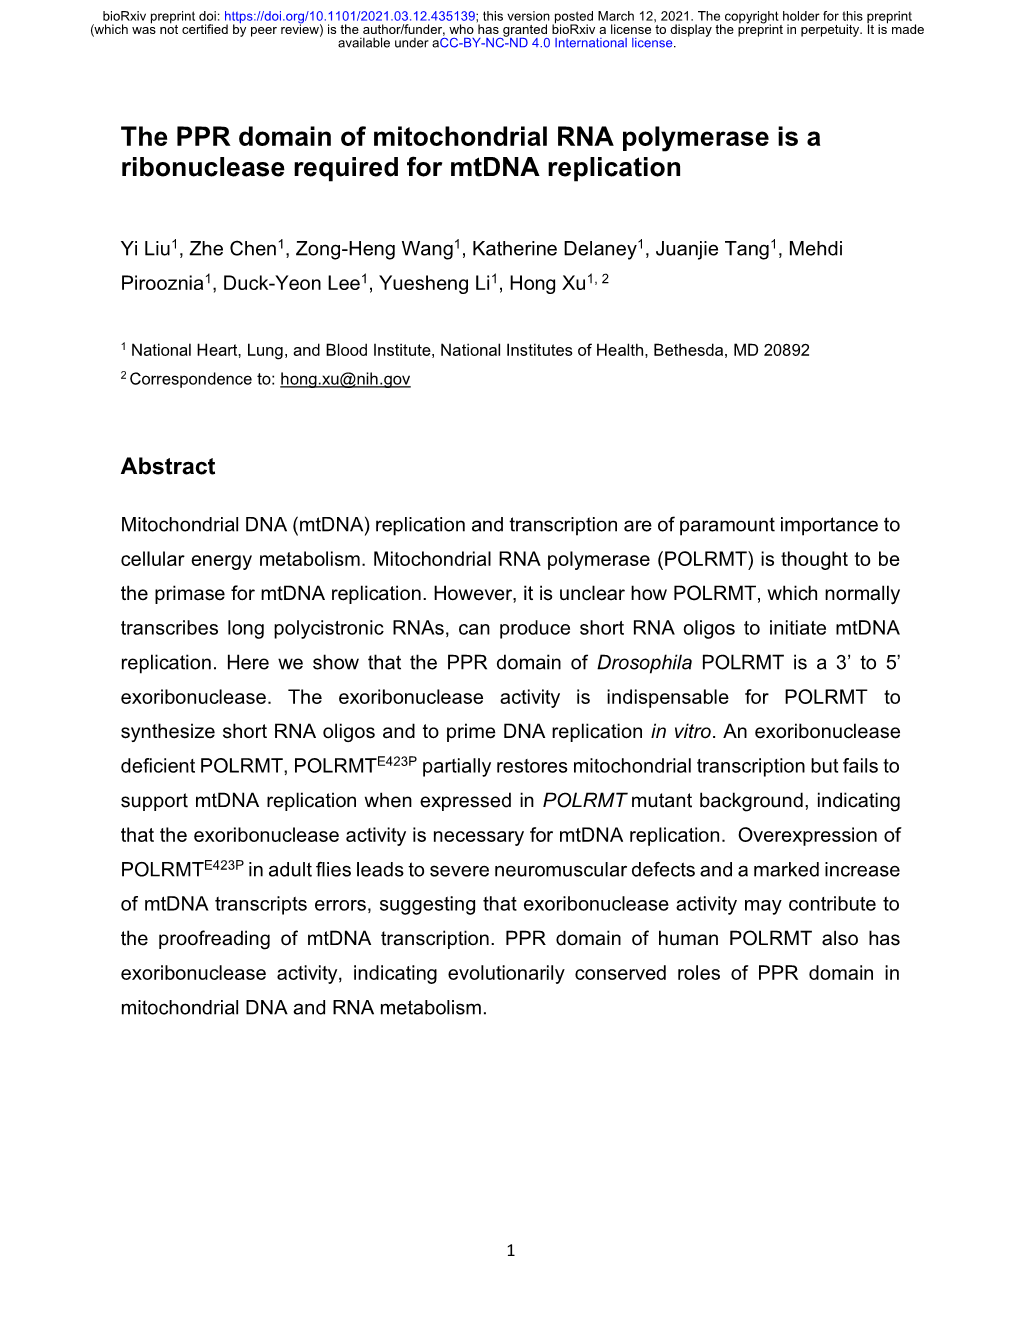 The PPR Domain of Mitochondrial RNA Polymerase Is a Ribonuclease Required for Mtdna Replication